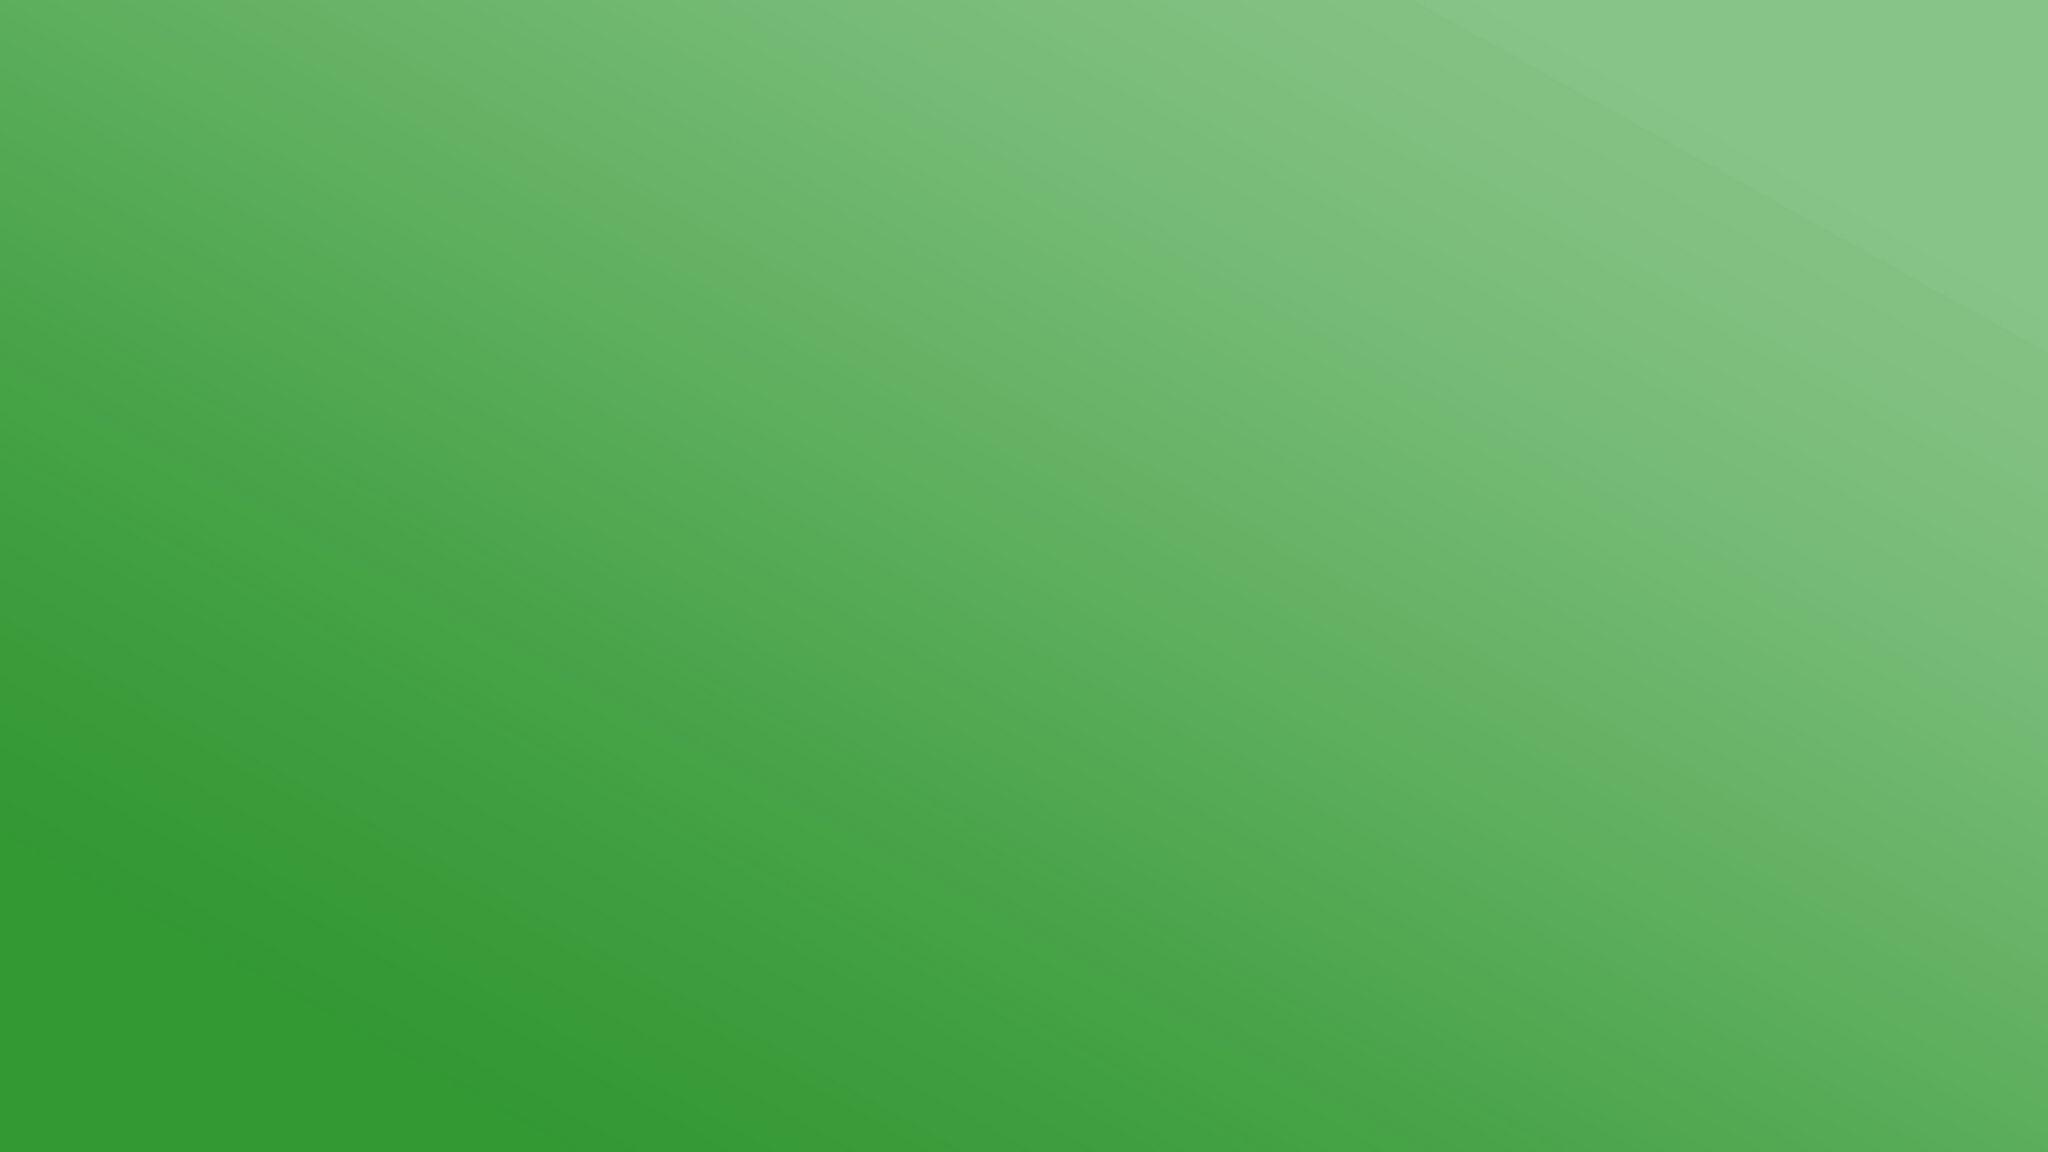 High-quality designs of 2048 x 1152 green background For a widescreen experience